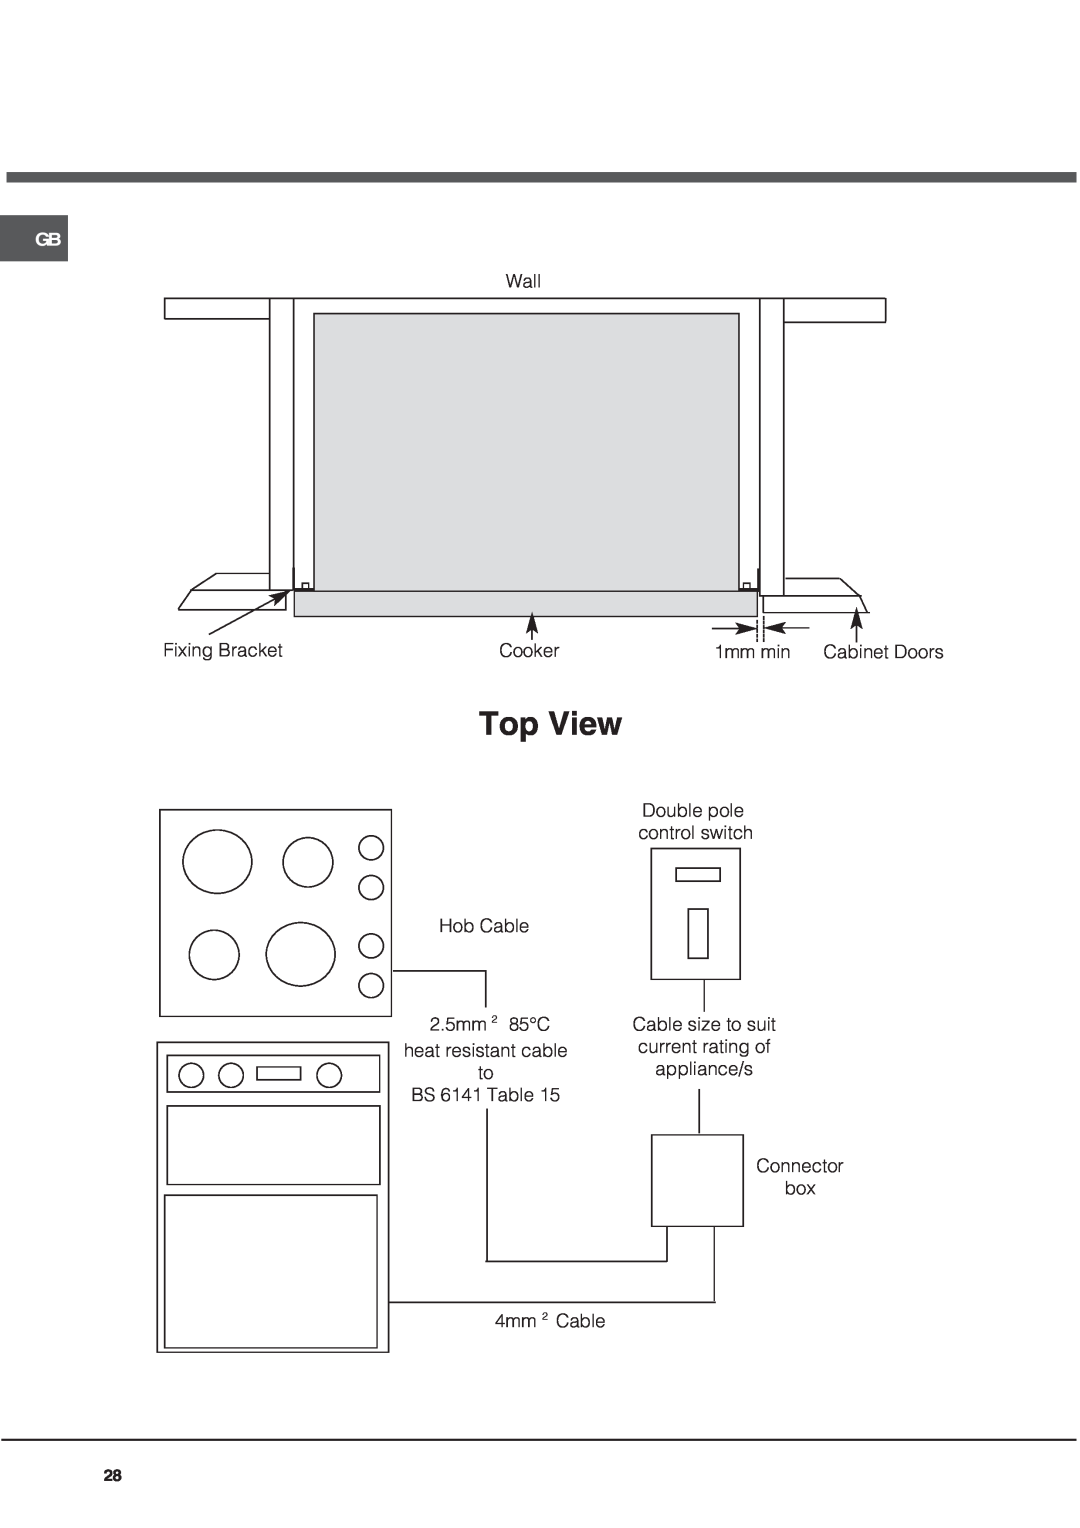 Hotpoint UQ47I2 Top View, Wall, Fixing Bracket, Cooker, 1mm min, Hob Cable, 2.5mm 2 85C, appliance/s, BS 6141 Table 